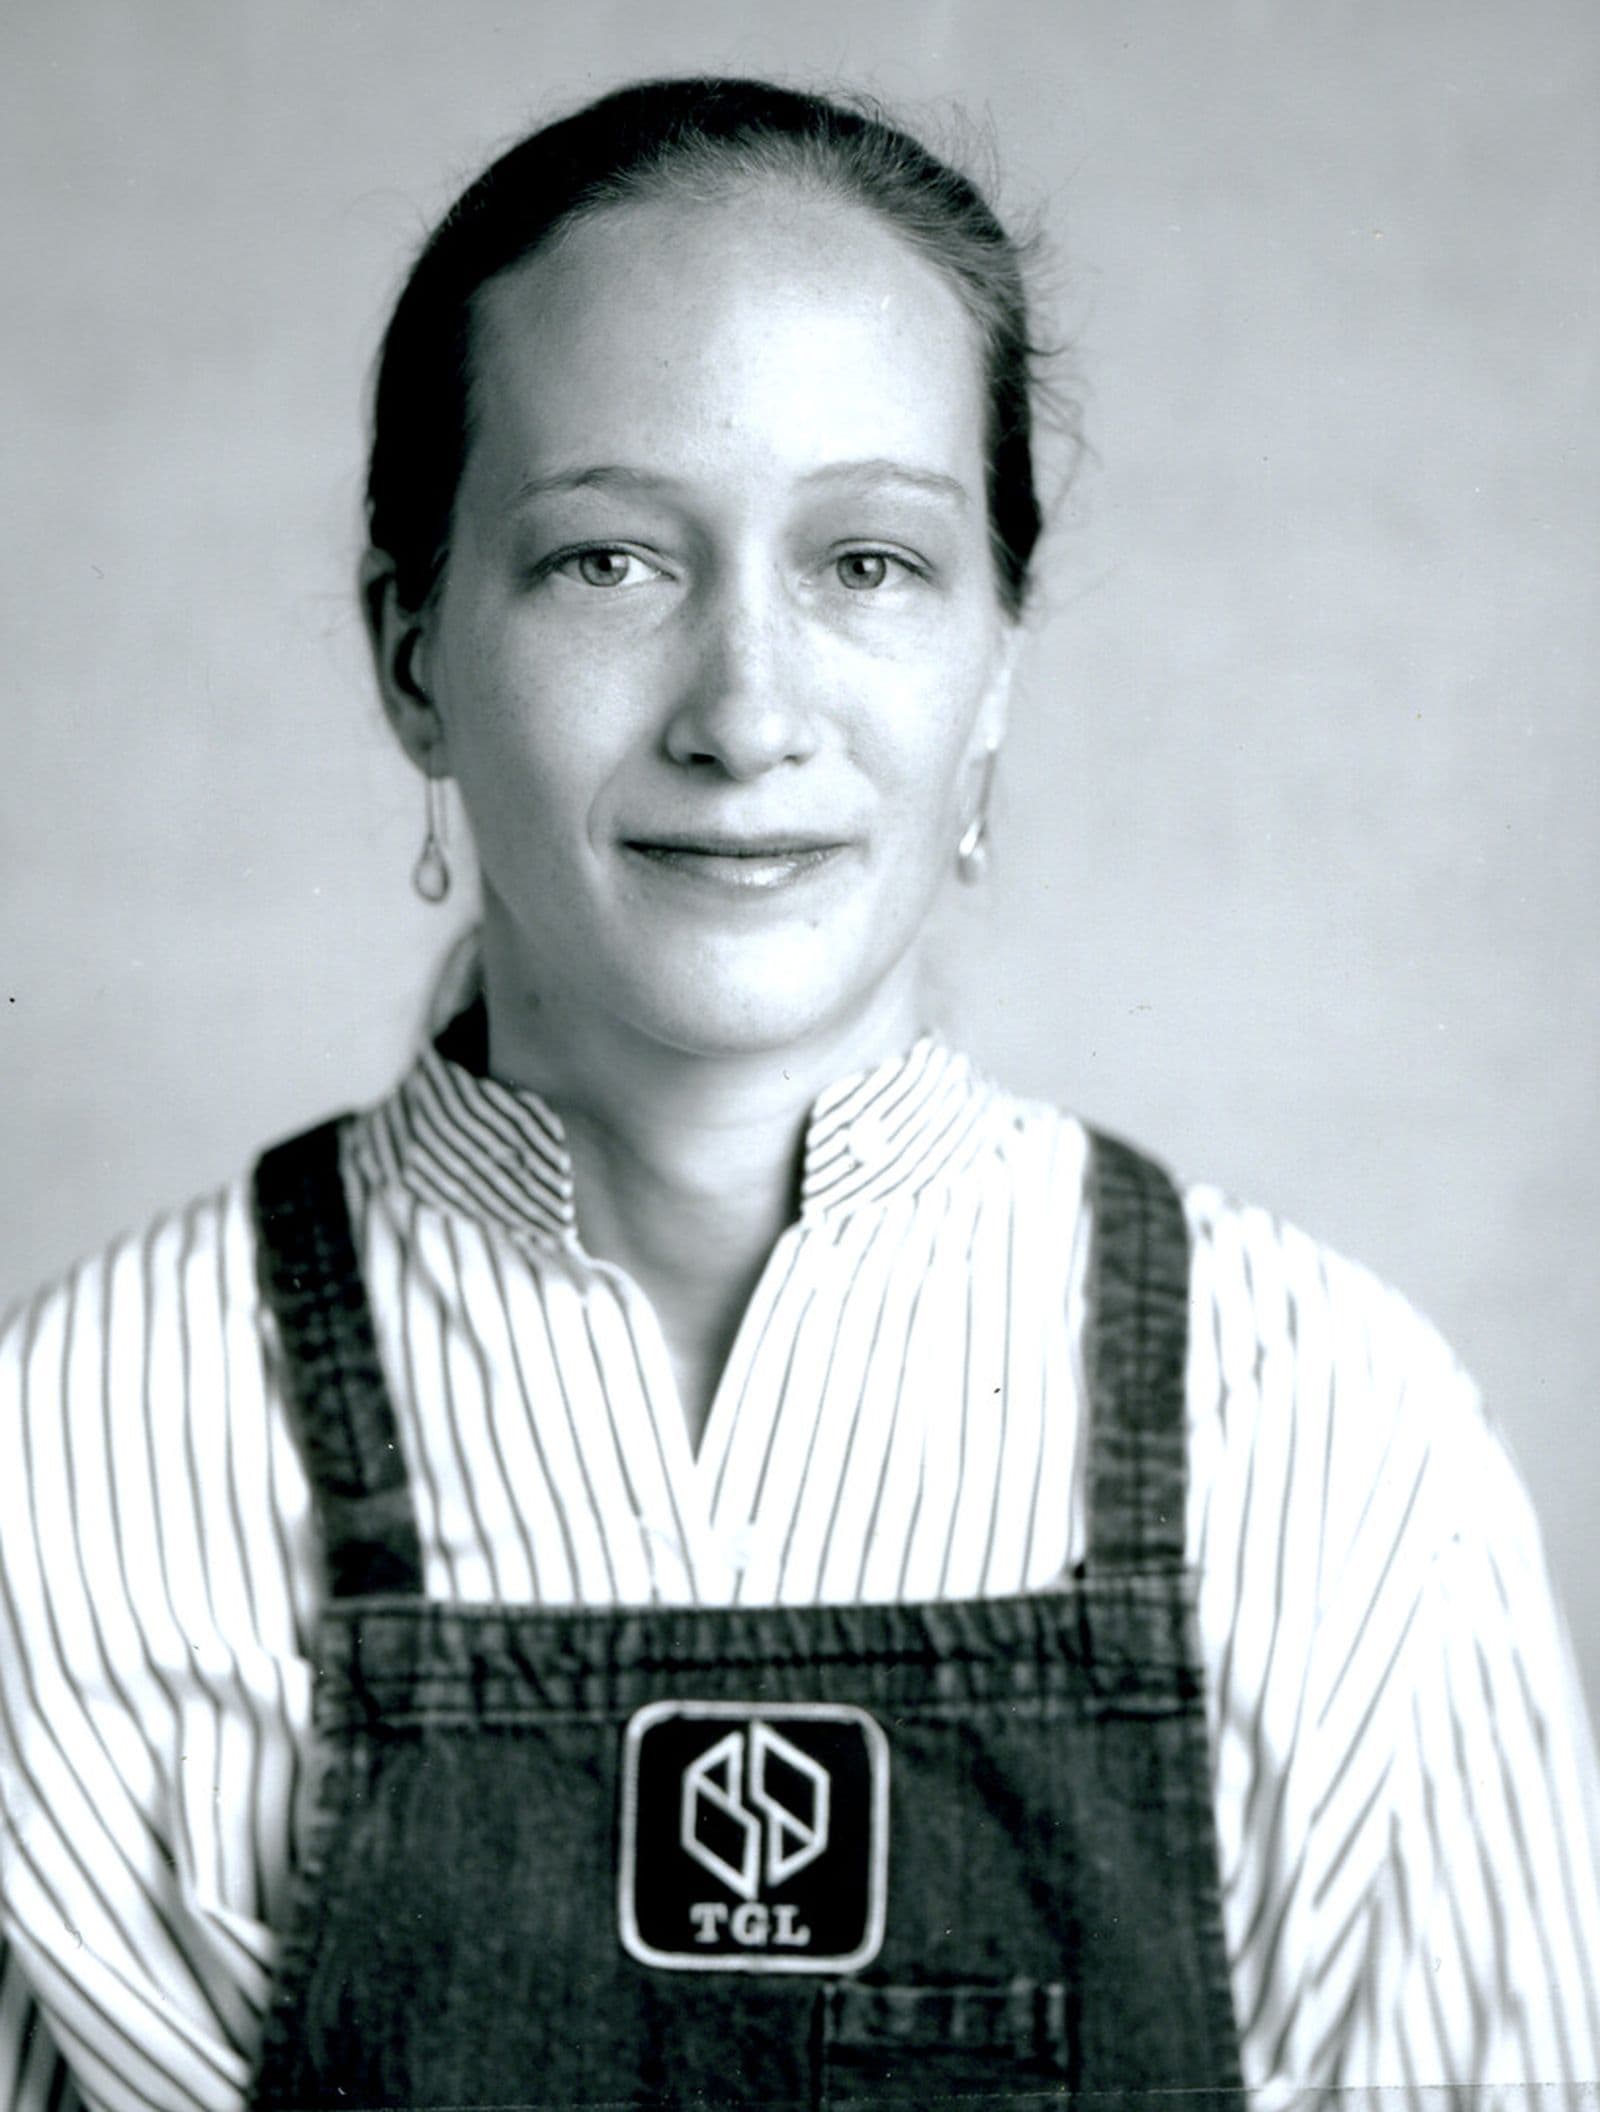 A black and white photograph of a woman wearing overalls